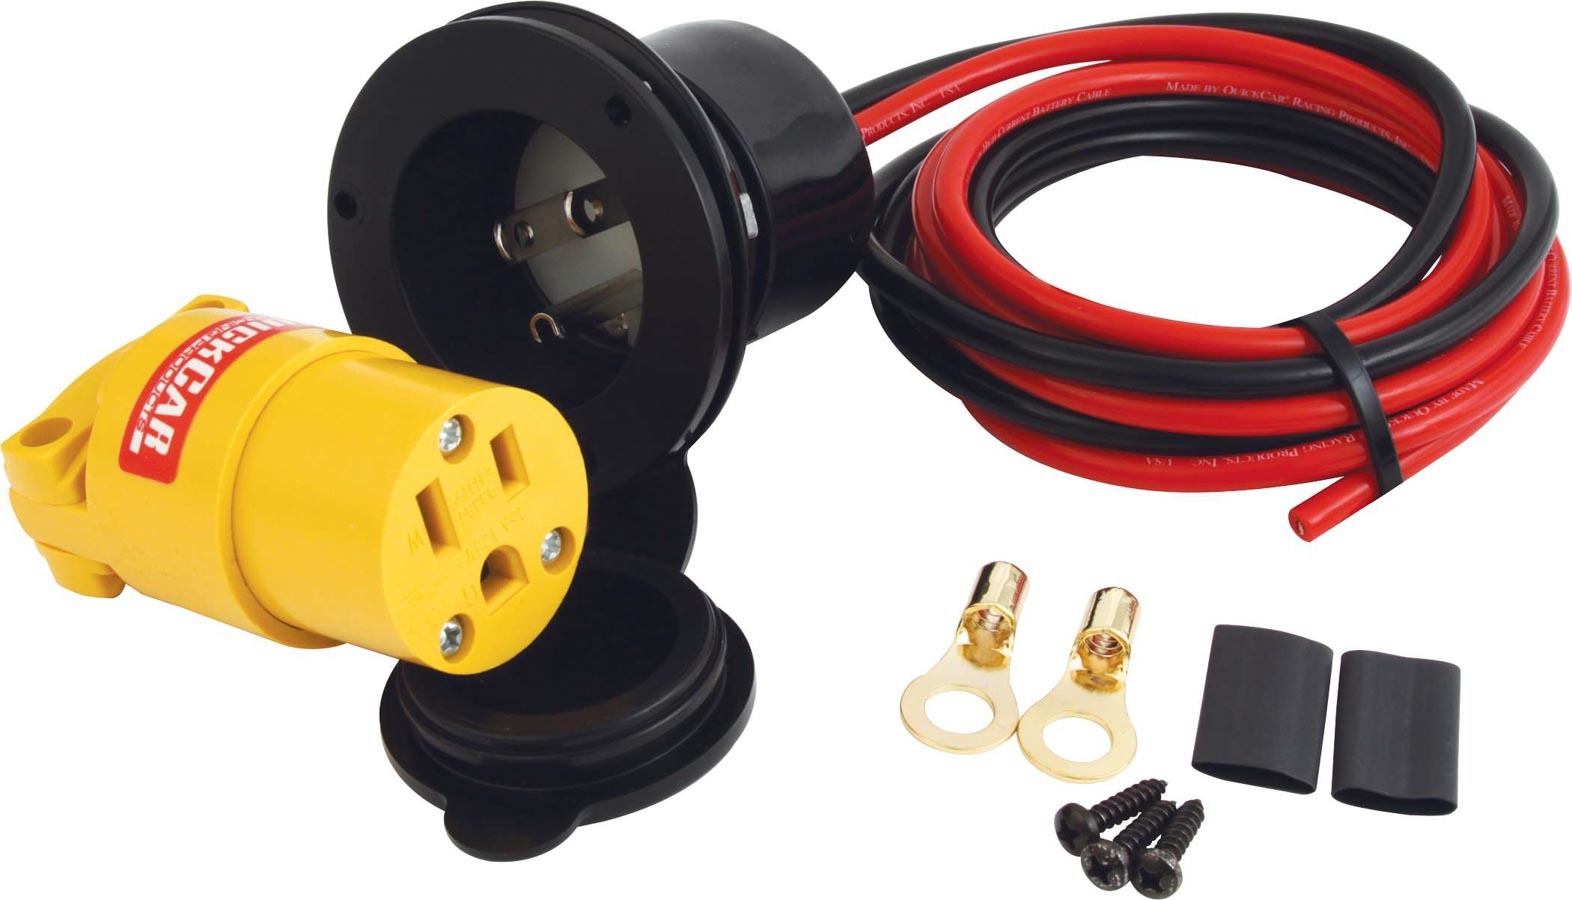 QuickCar 57-723 Accessory Plug-In, 110V, Flange Mount, 3-Prong Male Socket, Cover / Terminals / Wires Included, Kit